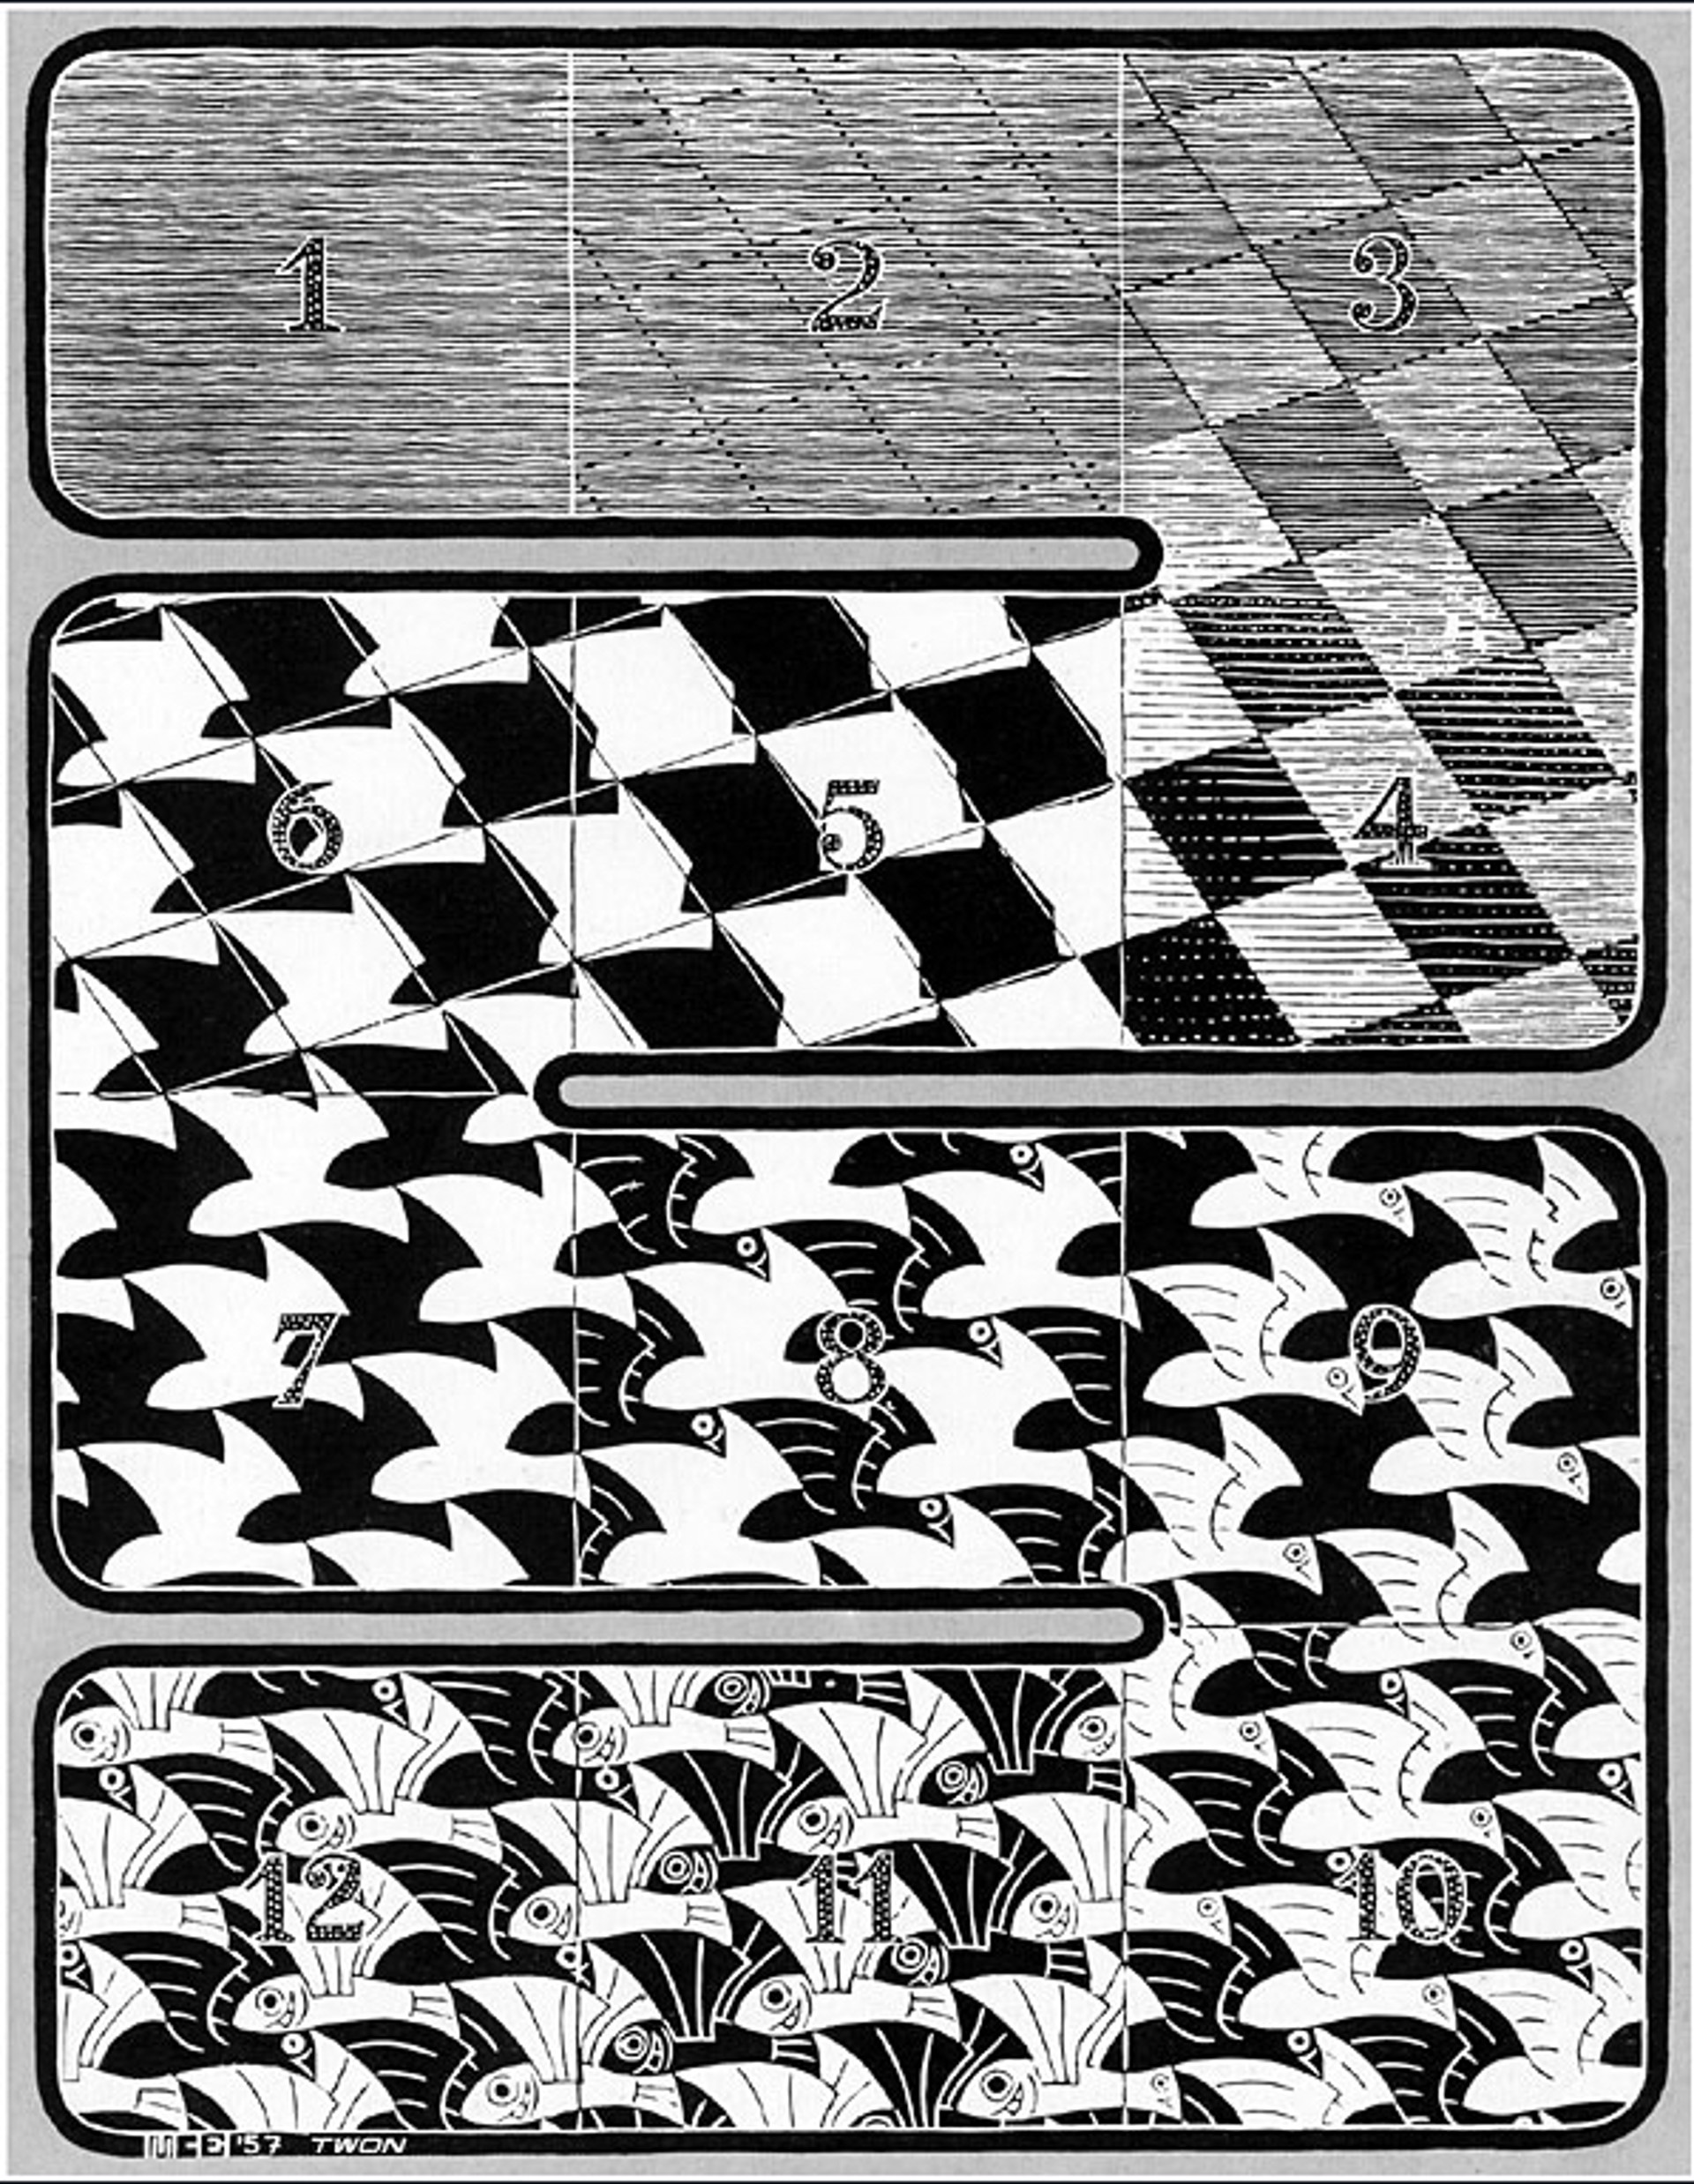 Regular Division of the Plane I by M.C. Escher